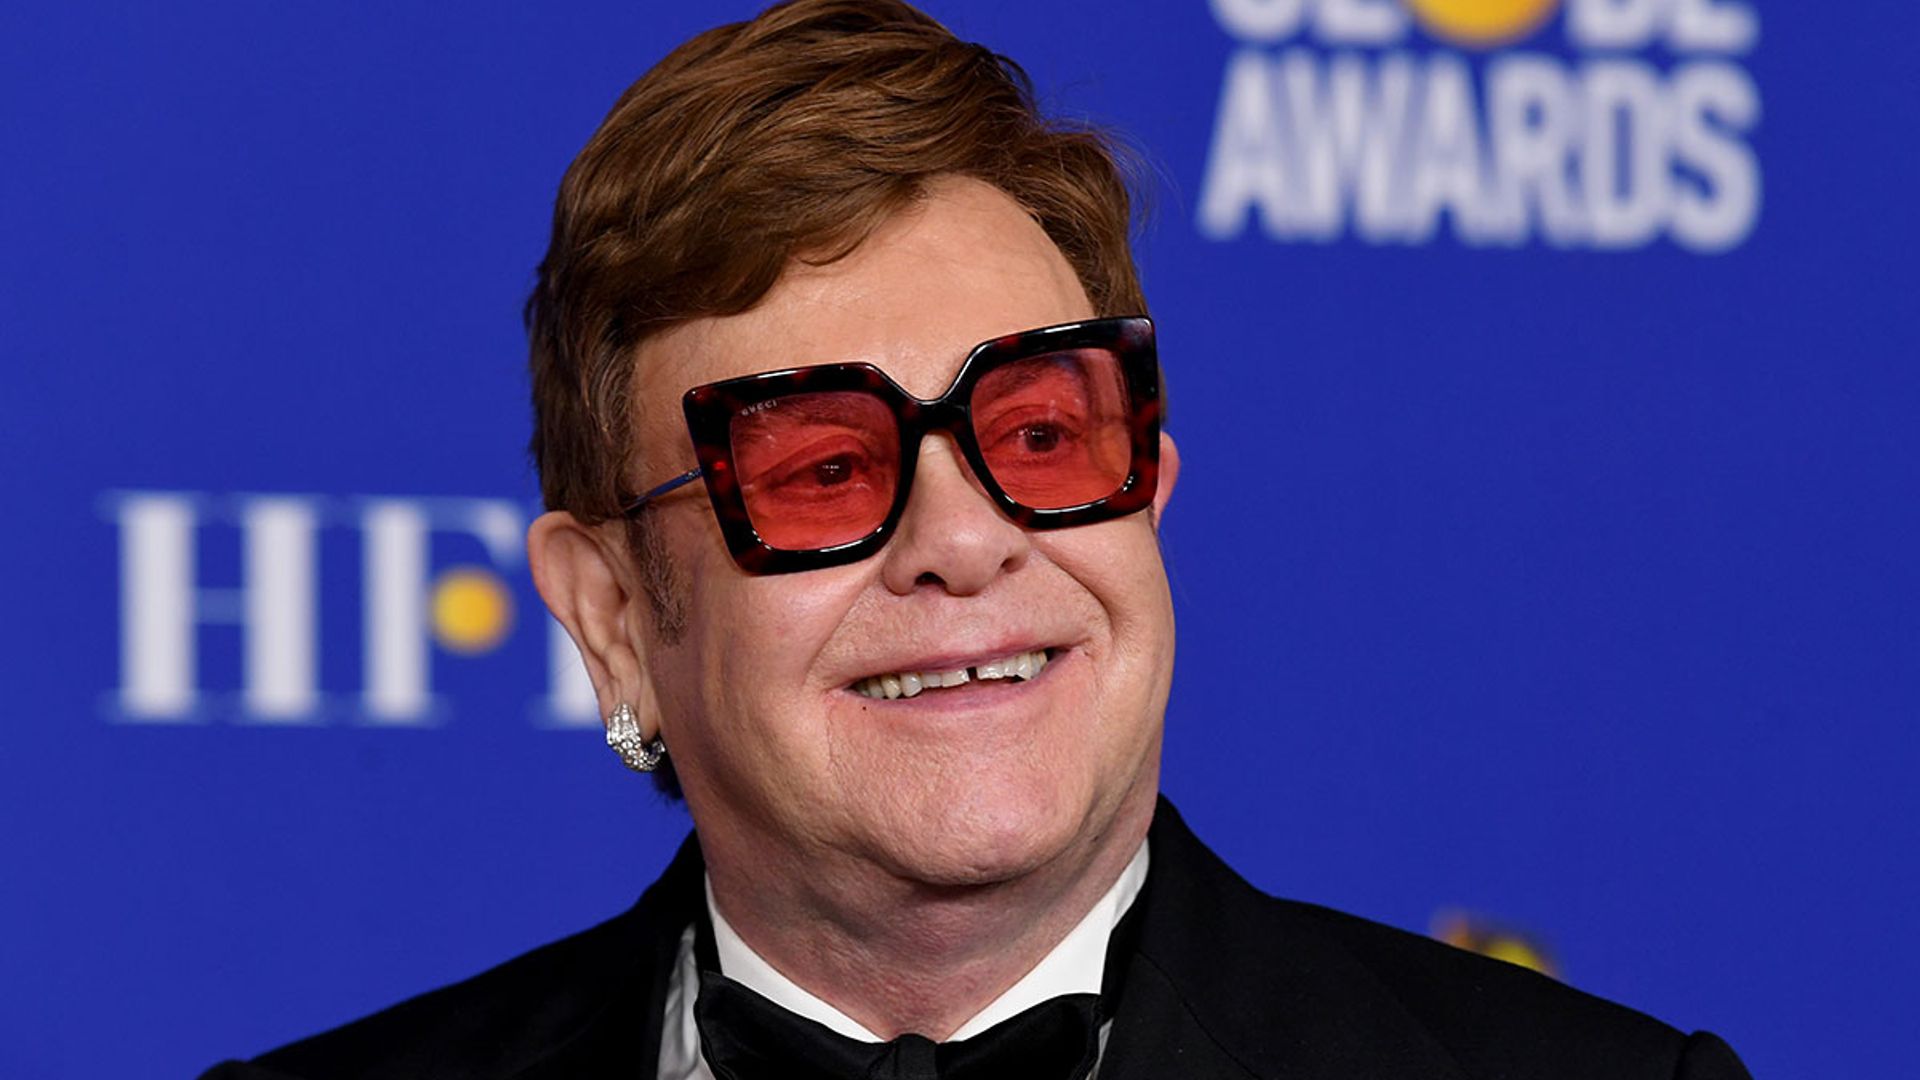 Elton John to appear on TV following surgery - details